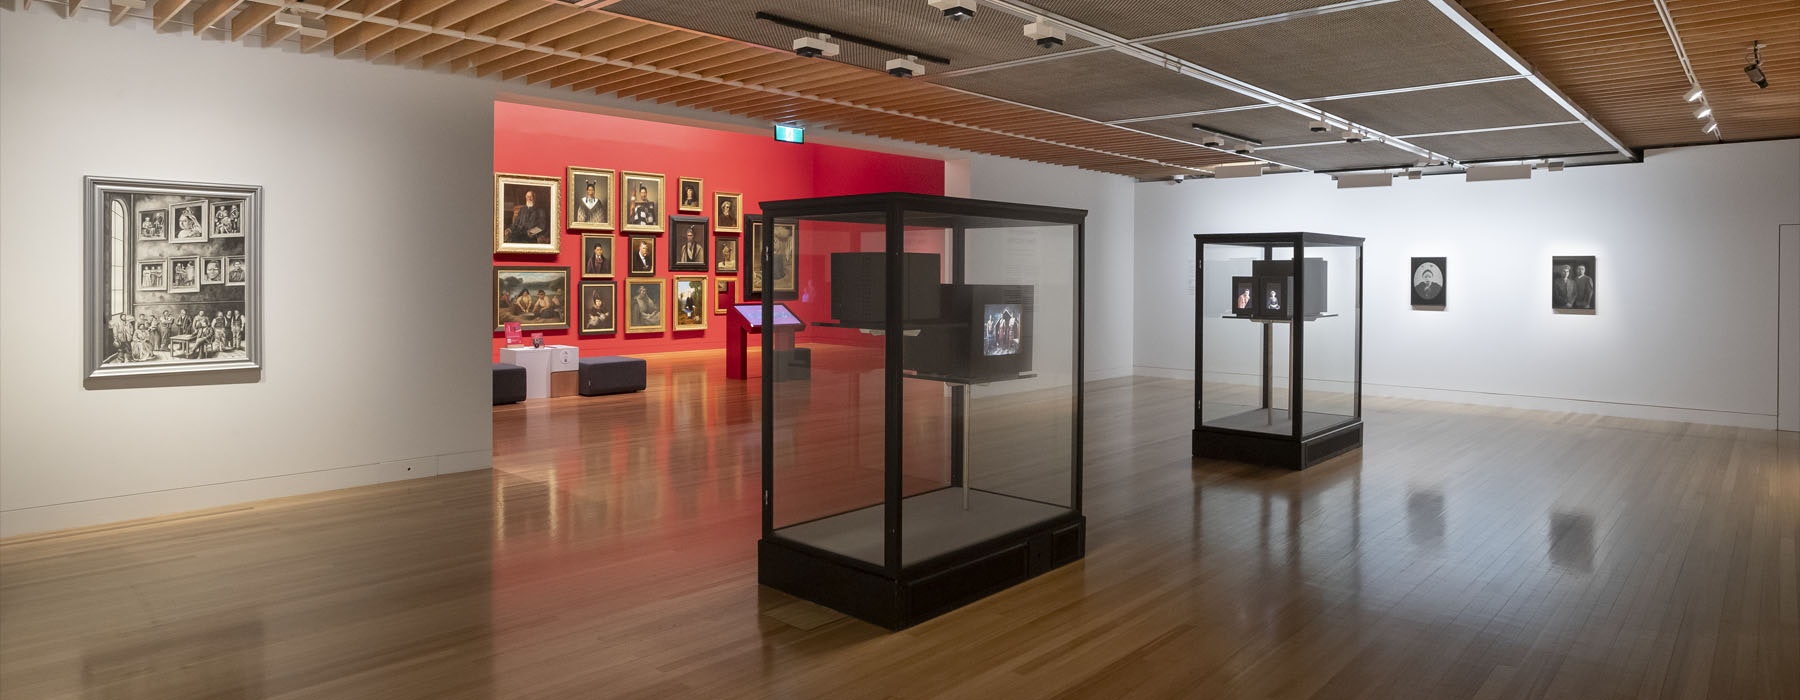 View of the exhibition ‘New Histories’, showing two display cases containing TV sets in them